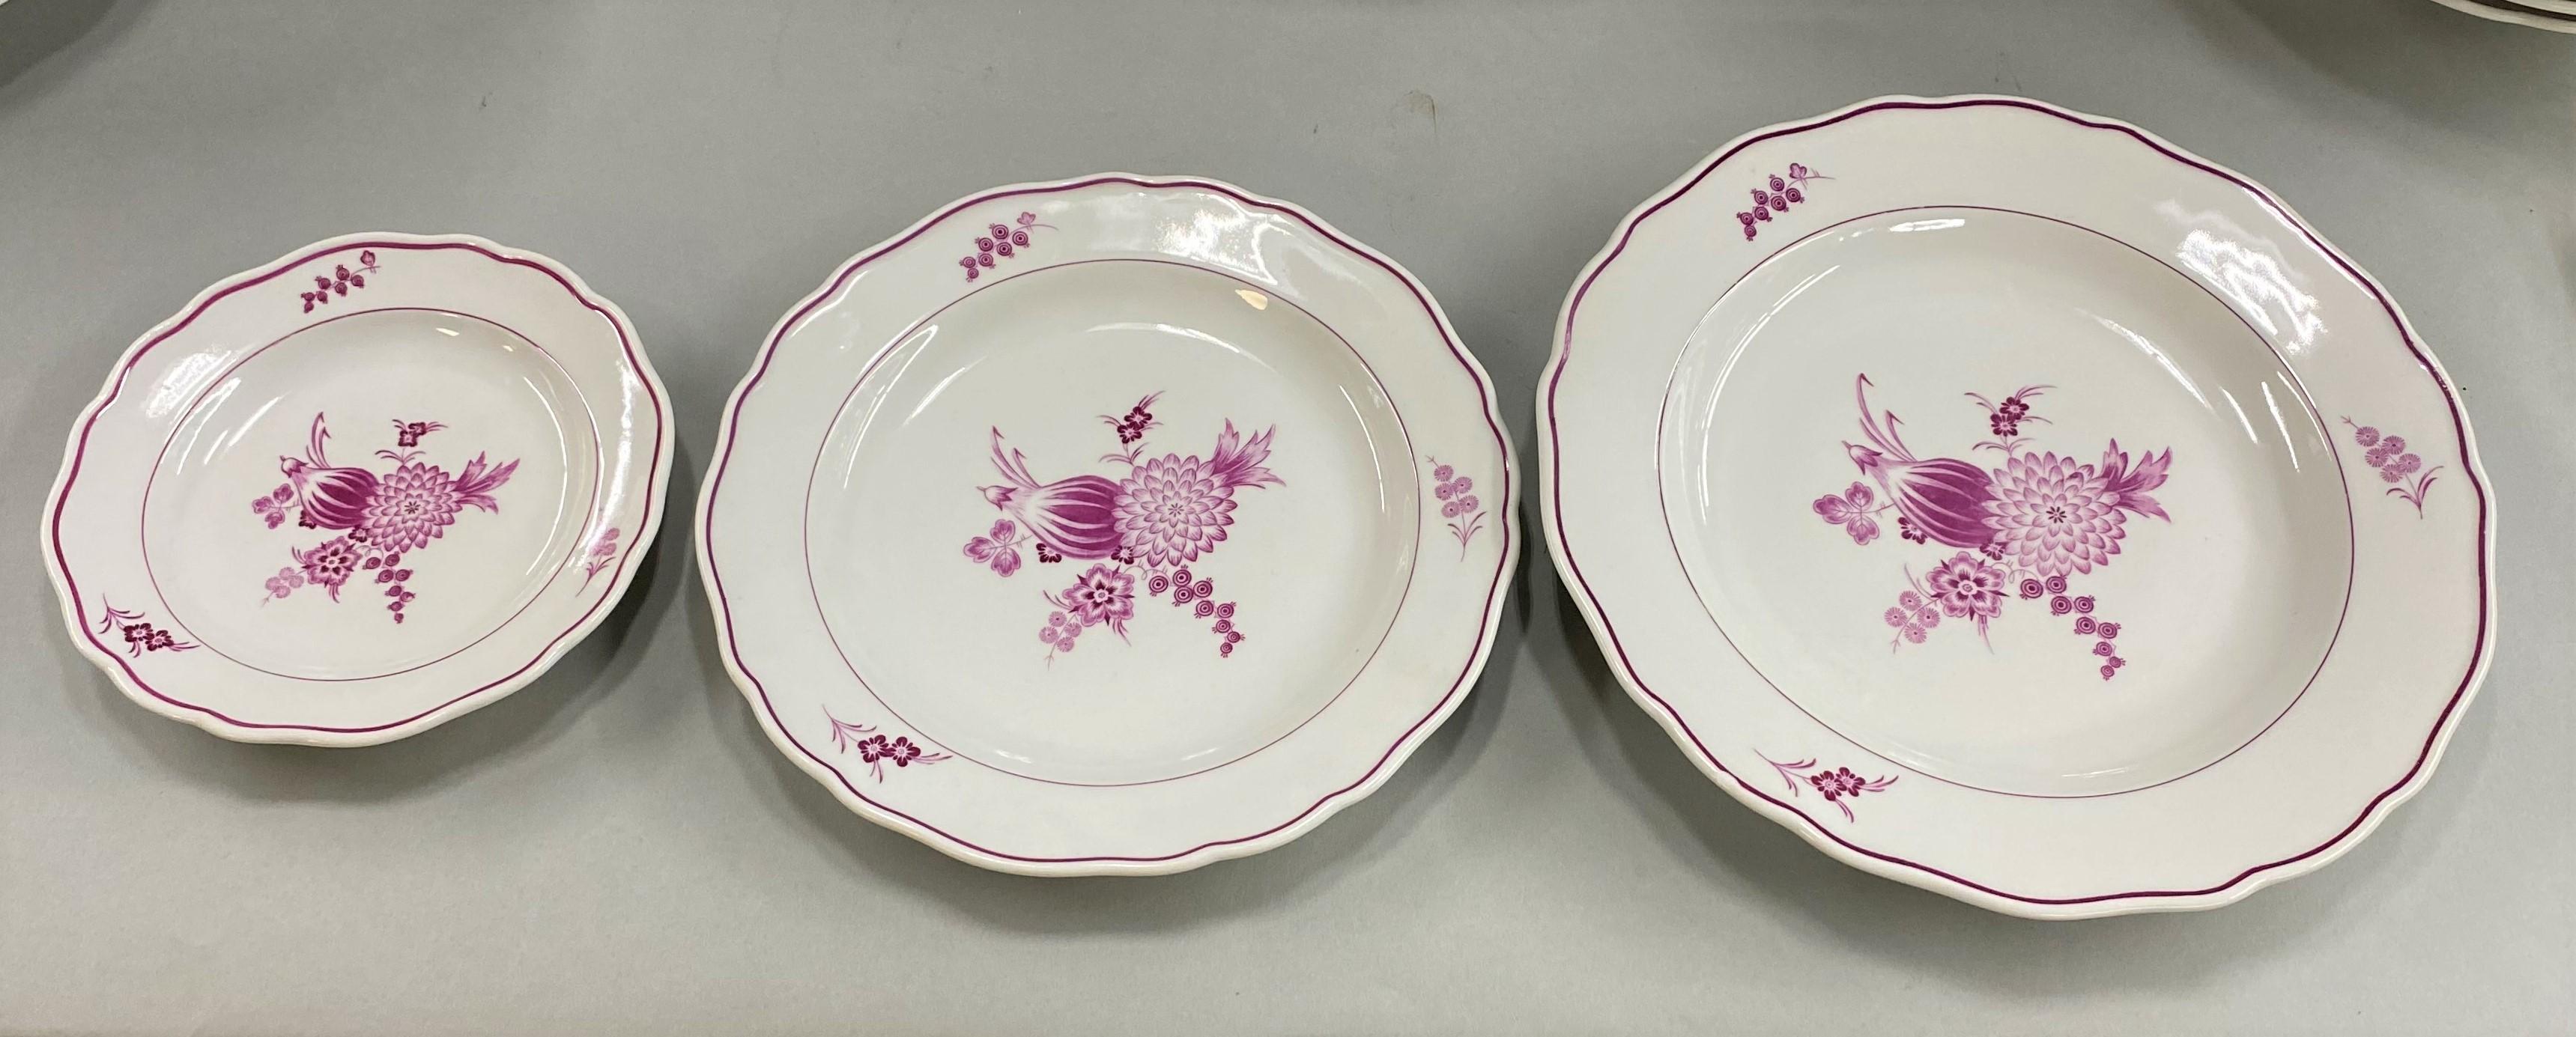 49-Piece Meissen Porcelain Dinner Service in Rare Puce/Purple Color In Good Condition For Sale In Milford, NH